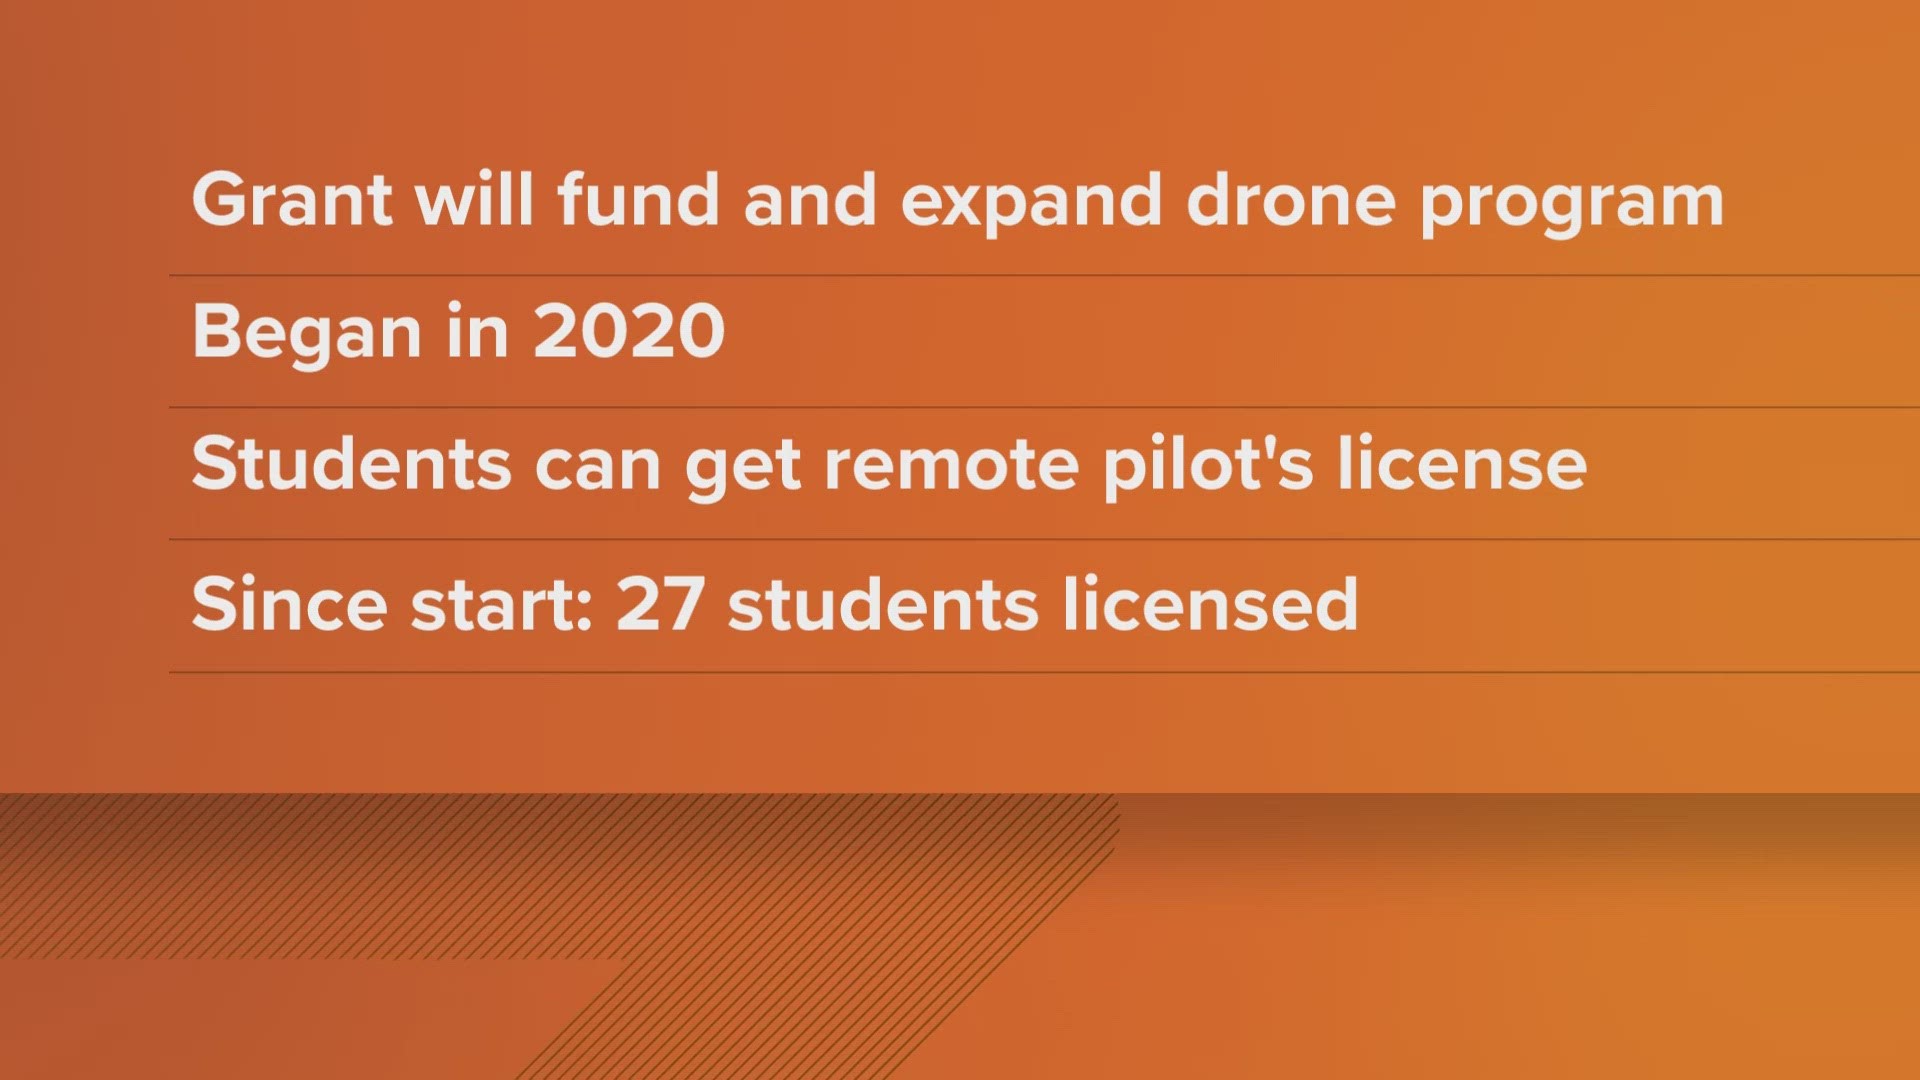 The district is receiving grant funding from the U.S. Department of Transportation and the Federal Aviation Administration.